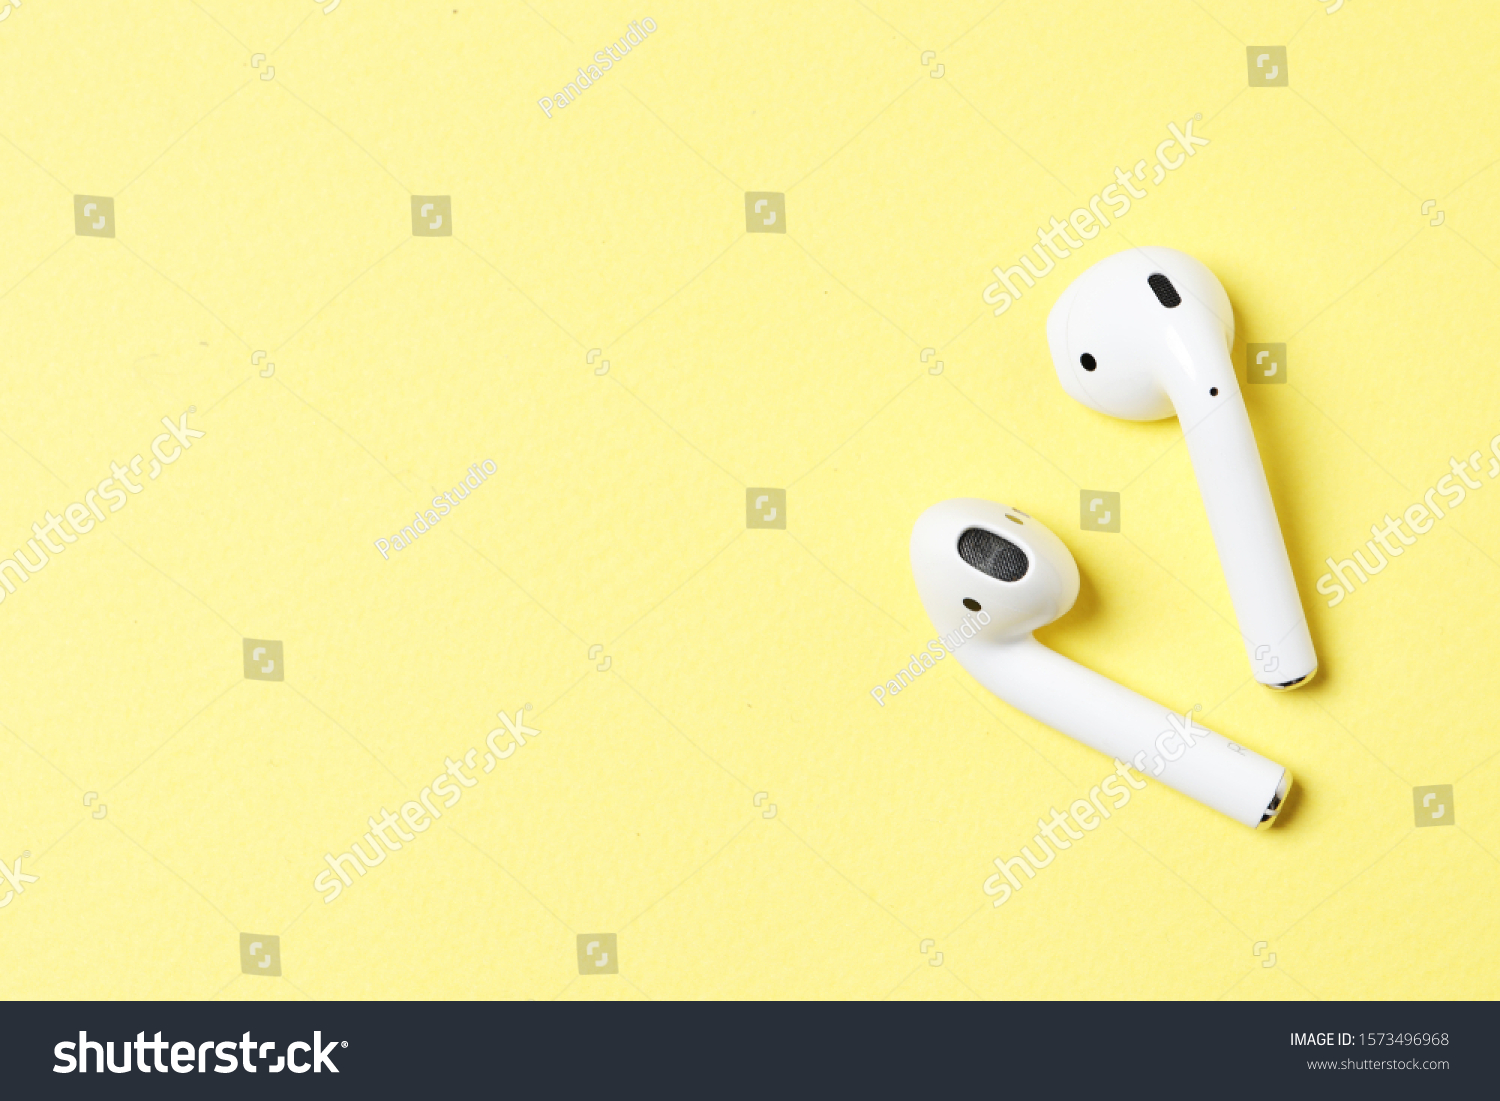 Wireless headphones on a yellow background with place for text. #1573496968